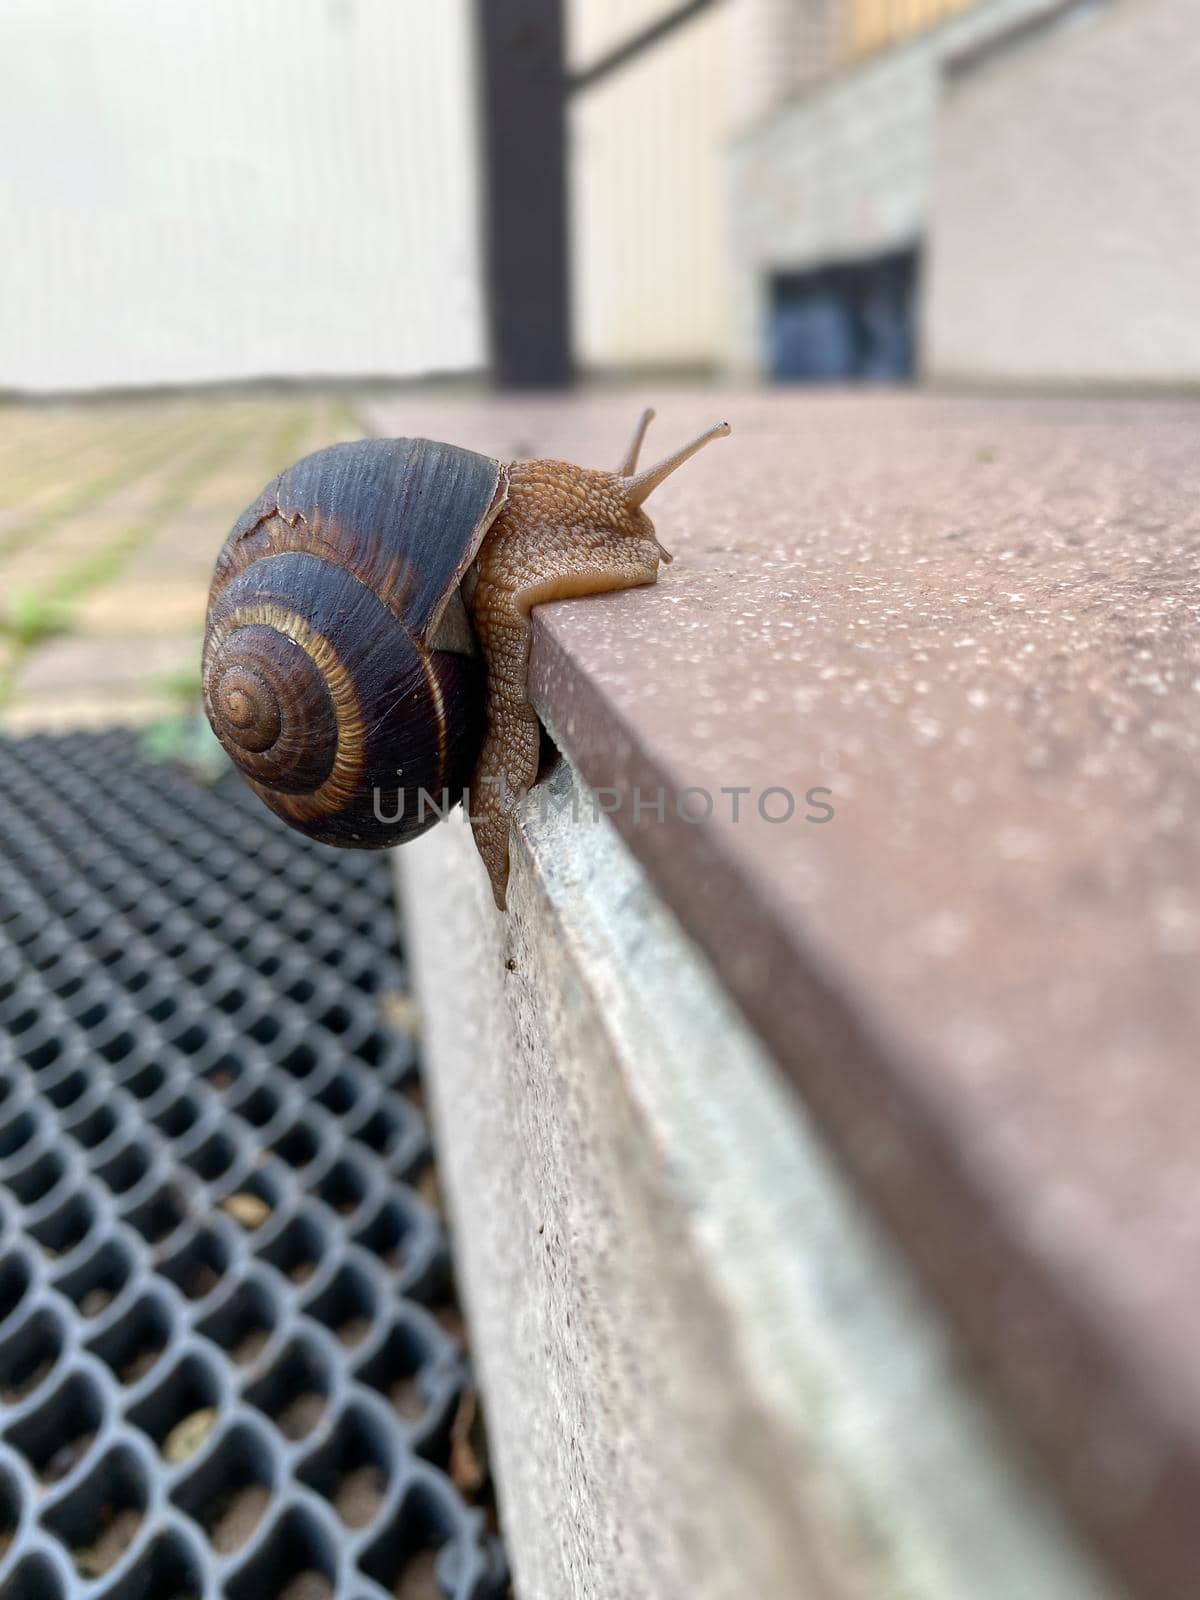 grape snail climbs up the steep rung of a staircase by Proxima13